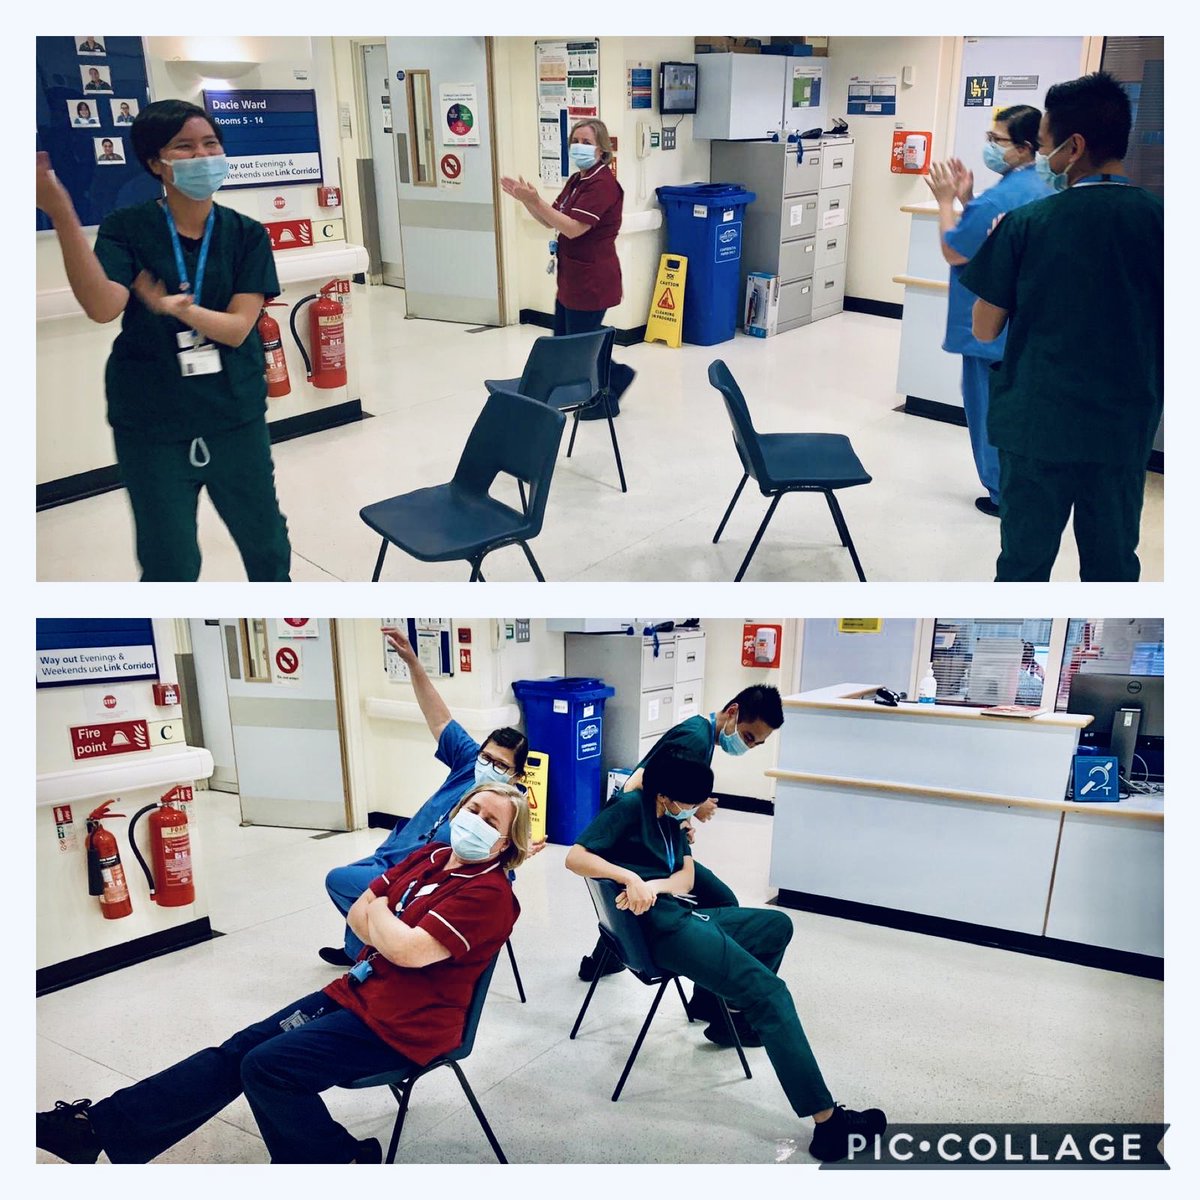 The game of elimination #MusicalChairs anyone?🤗 🤗 Dacie ward staff getting competitive! #ChildhoodGames #NursesActive #ImperialActive @MarcelleTauber @karhod21 @adliteb @Marie_Batey @AVillagracia